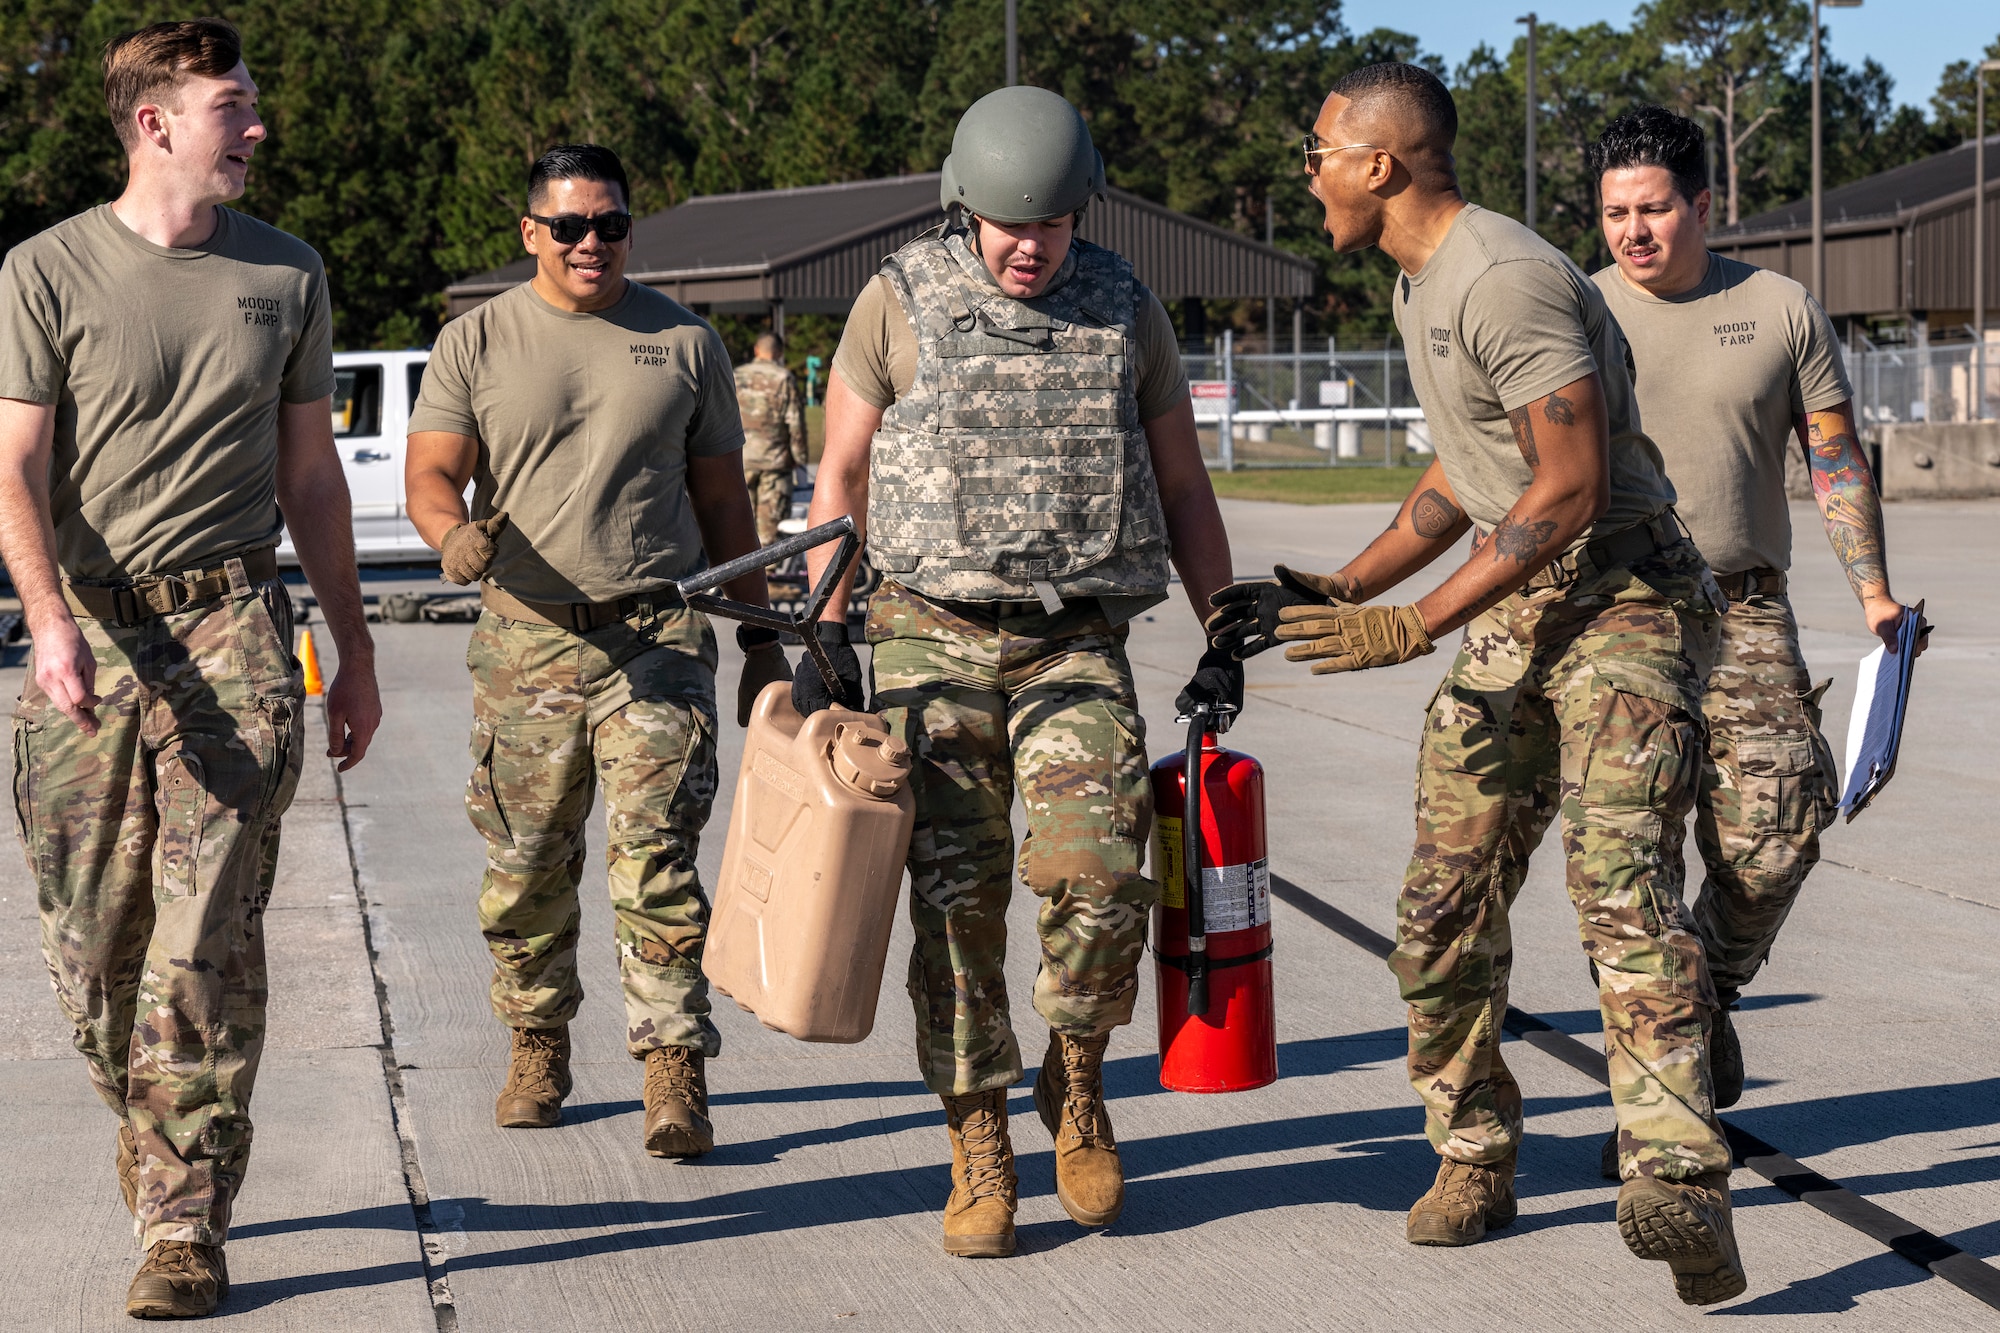 U.S. Air Force Staff Sgt. Mike Huynh, center, 23rd Logistic Readiness Squadron distribution supervisor, tries out for the forward area refueling point team